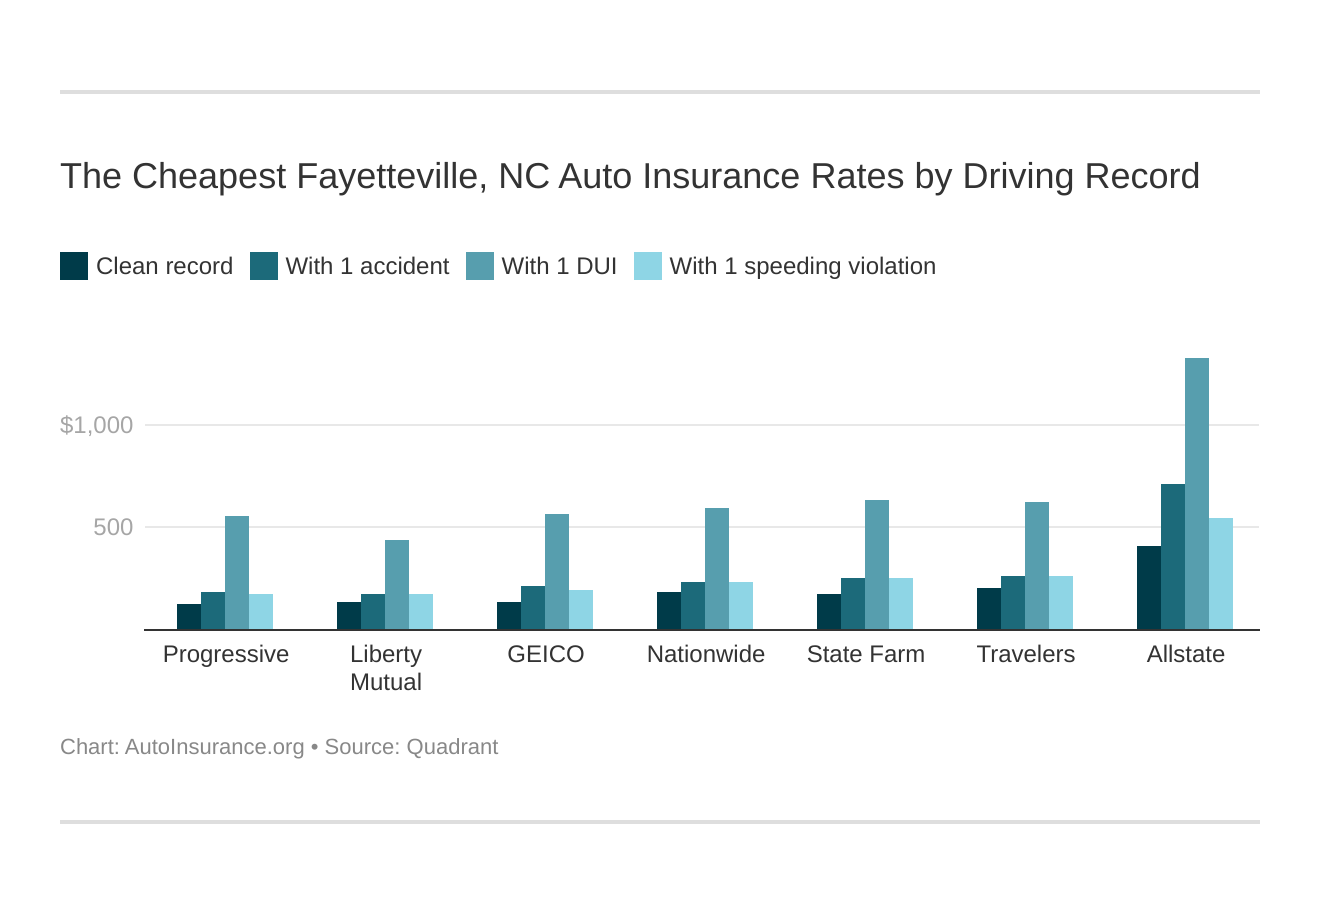 The Cheapest Fayetteville, NC Auto Insurance Rates by Driving Record